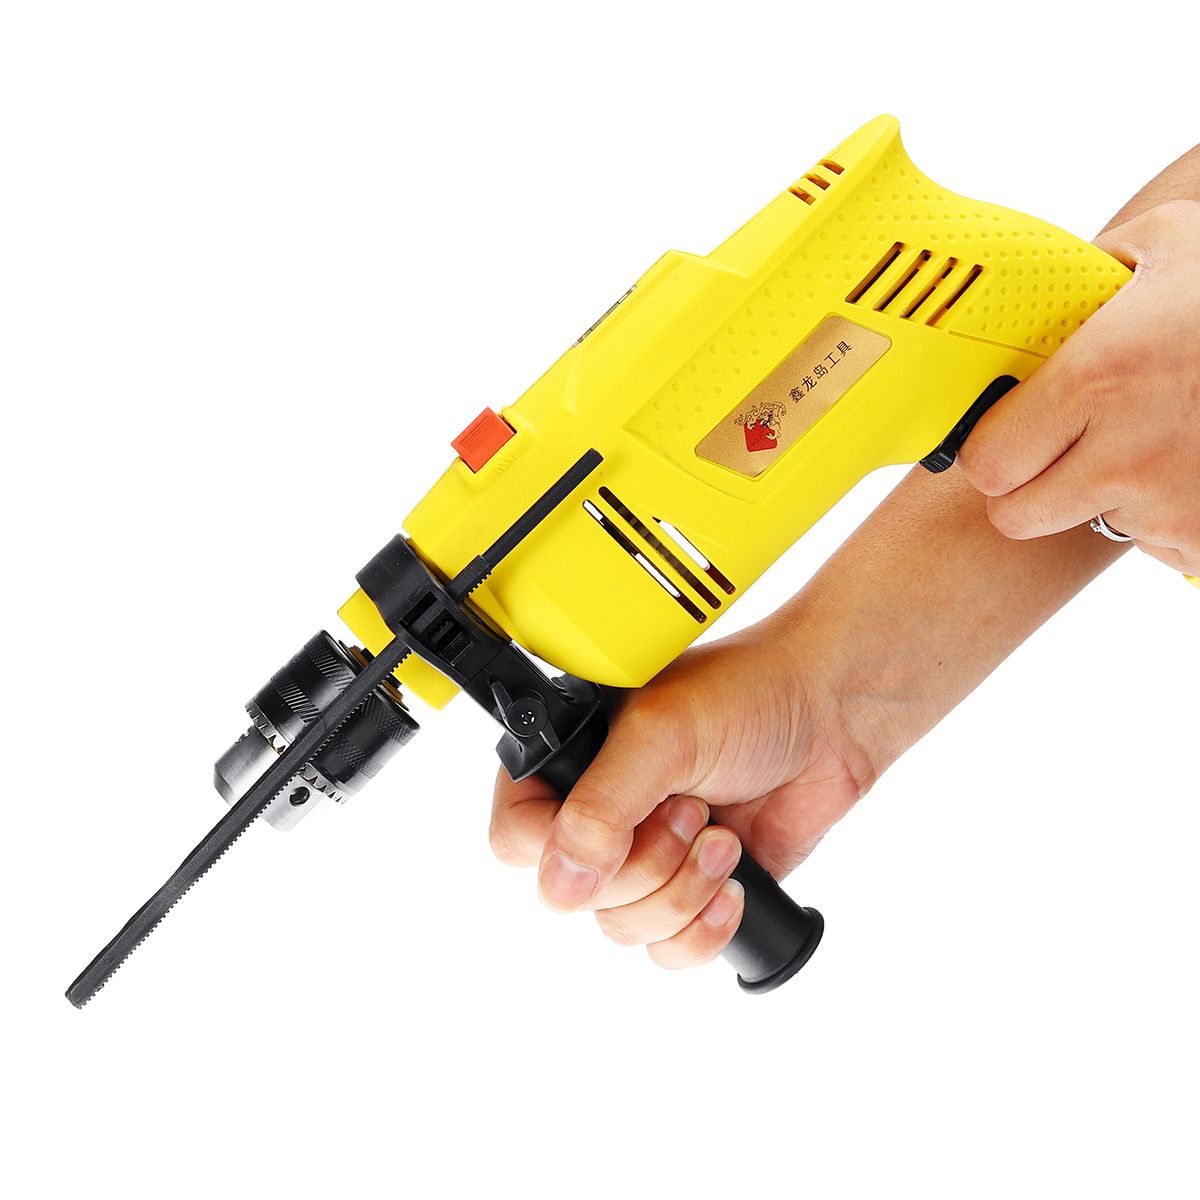 1980W-3800rpm-Electric-Impact-Drill-0-3800rmin-Electric-Drill-Five-Axes-Linkage-Power-Drills-Powerfu-1468497